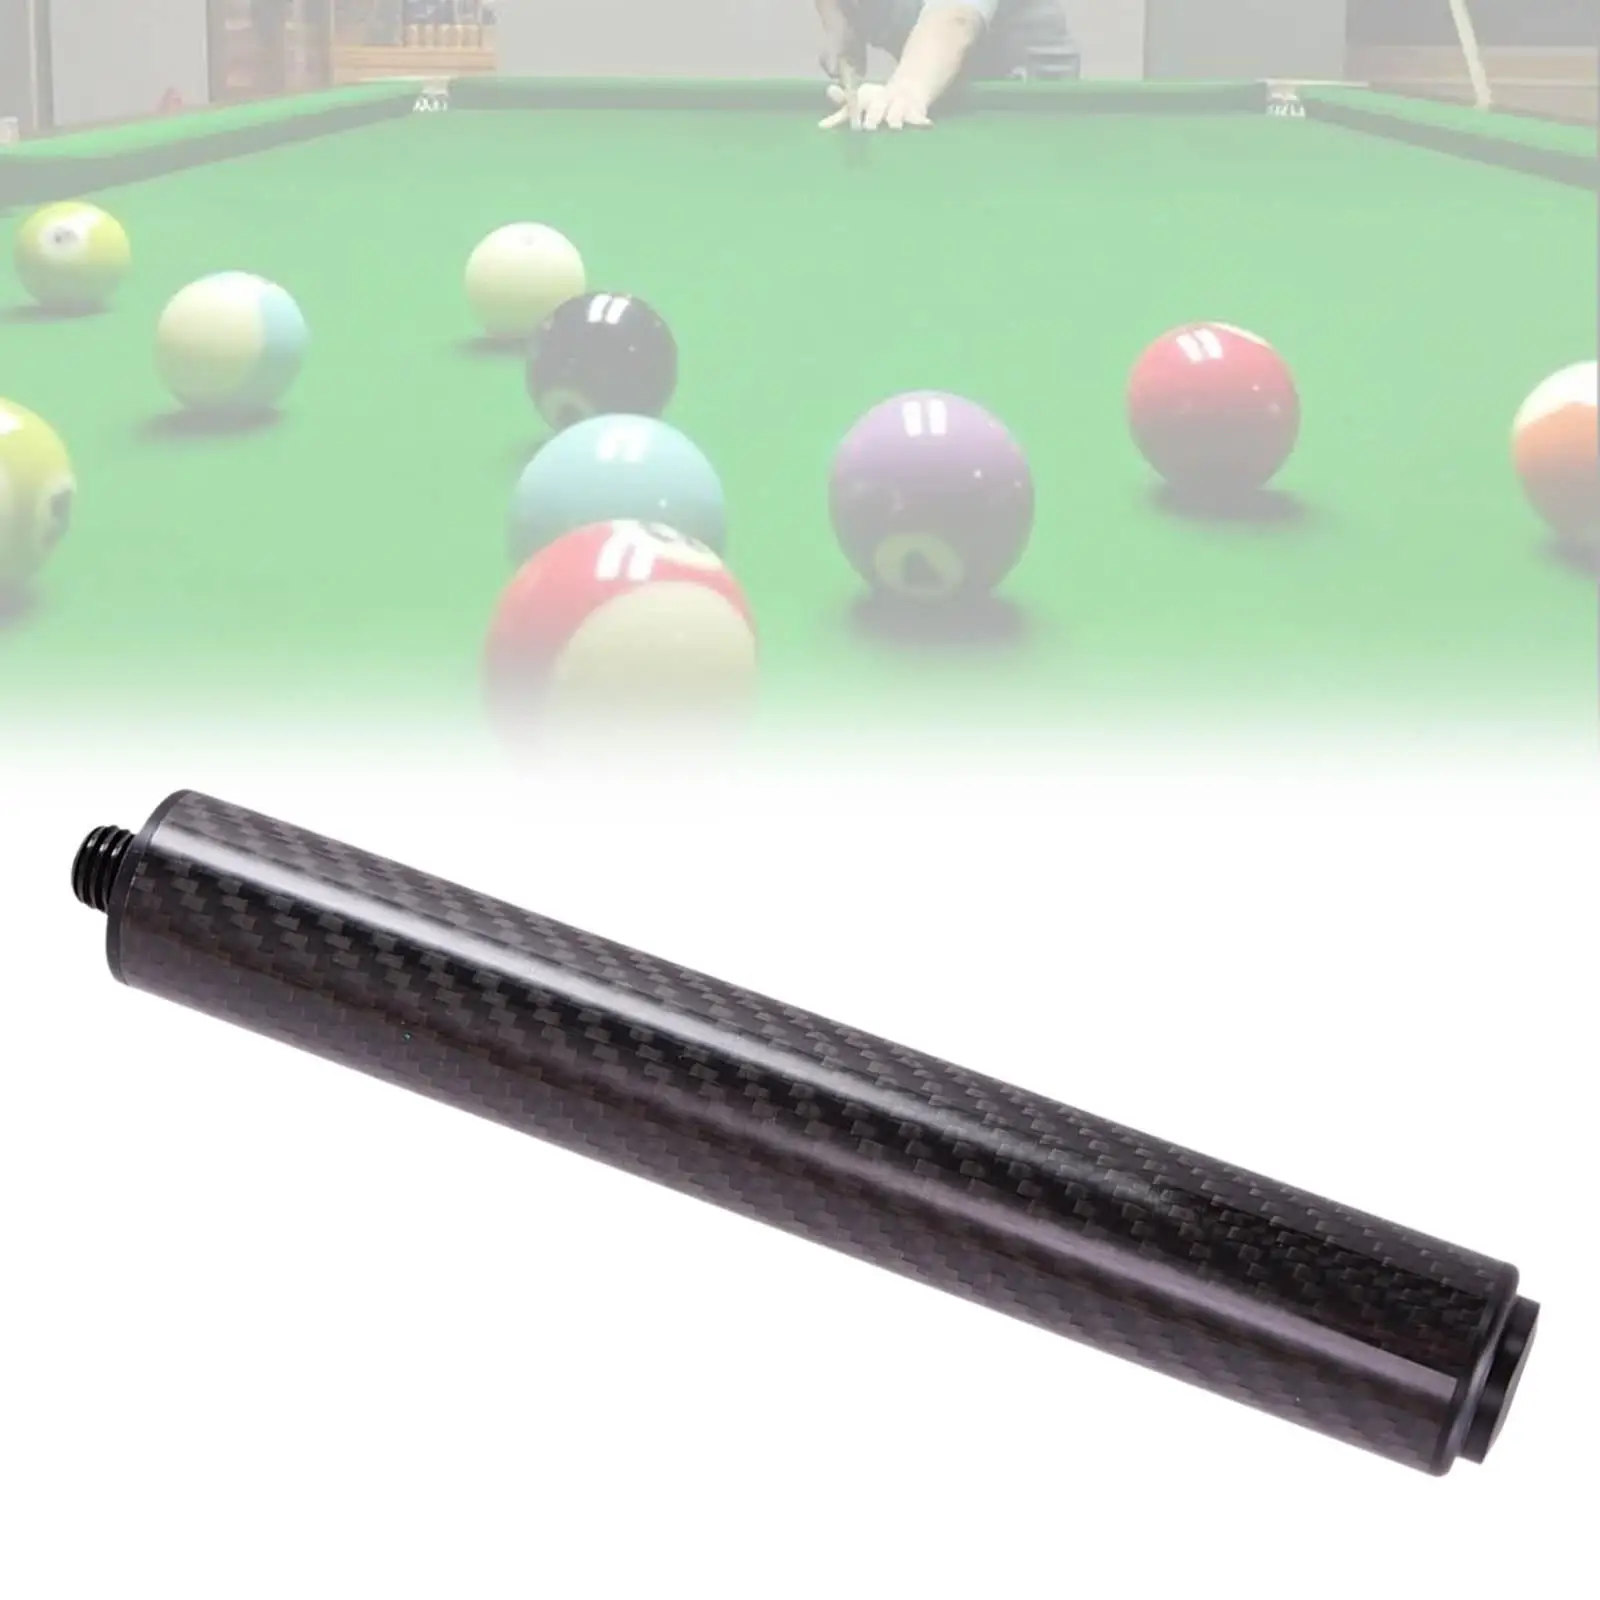 Lightweight Billiards Cue Extensions Pool Cue Extension Extendable Tool